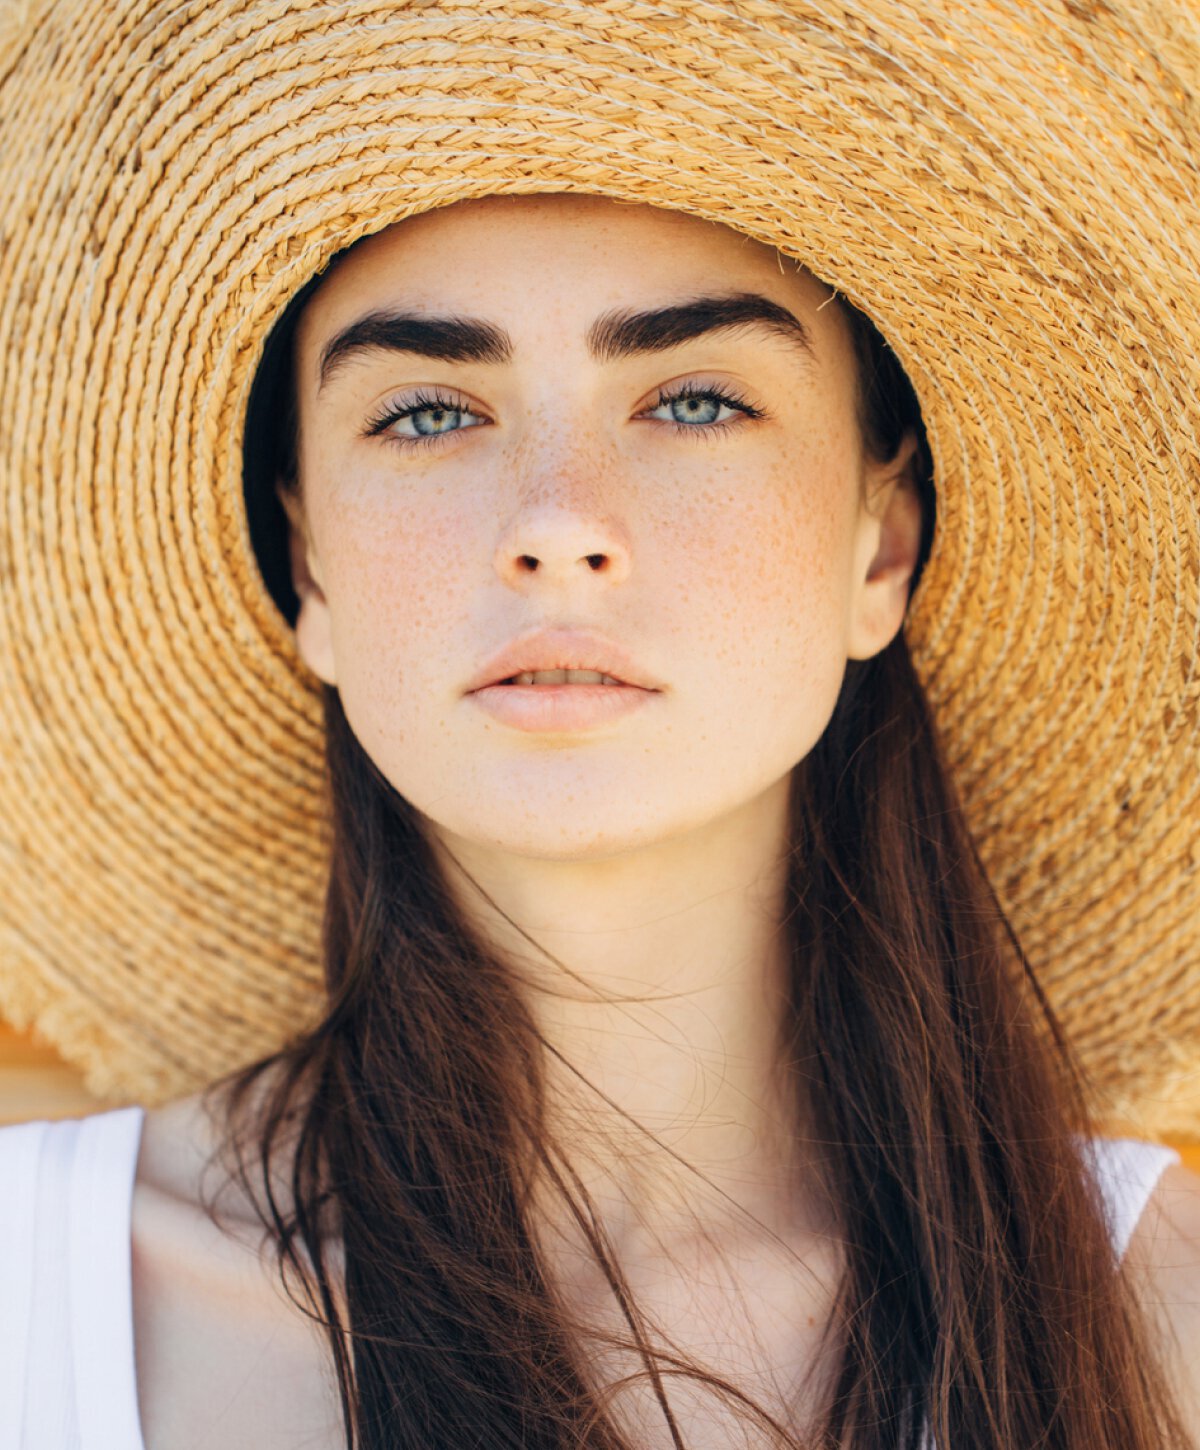 Woman with strong eyebrows and hat